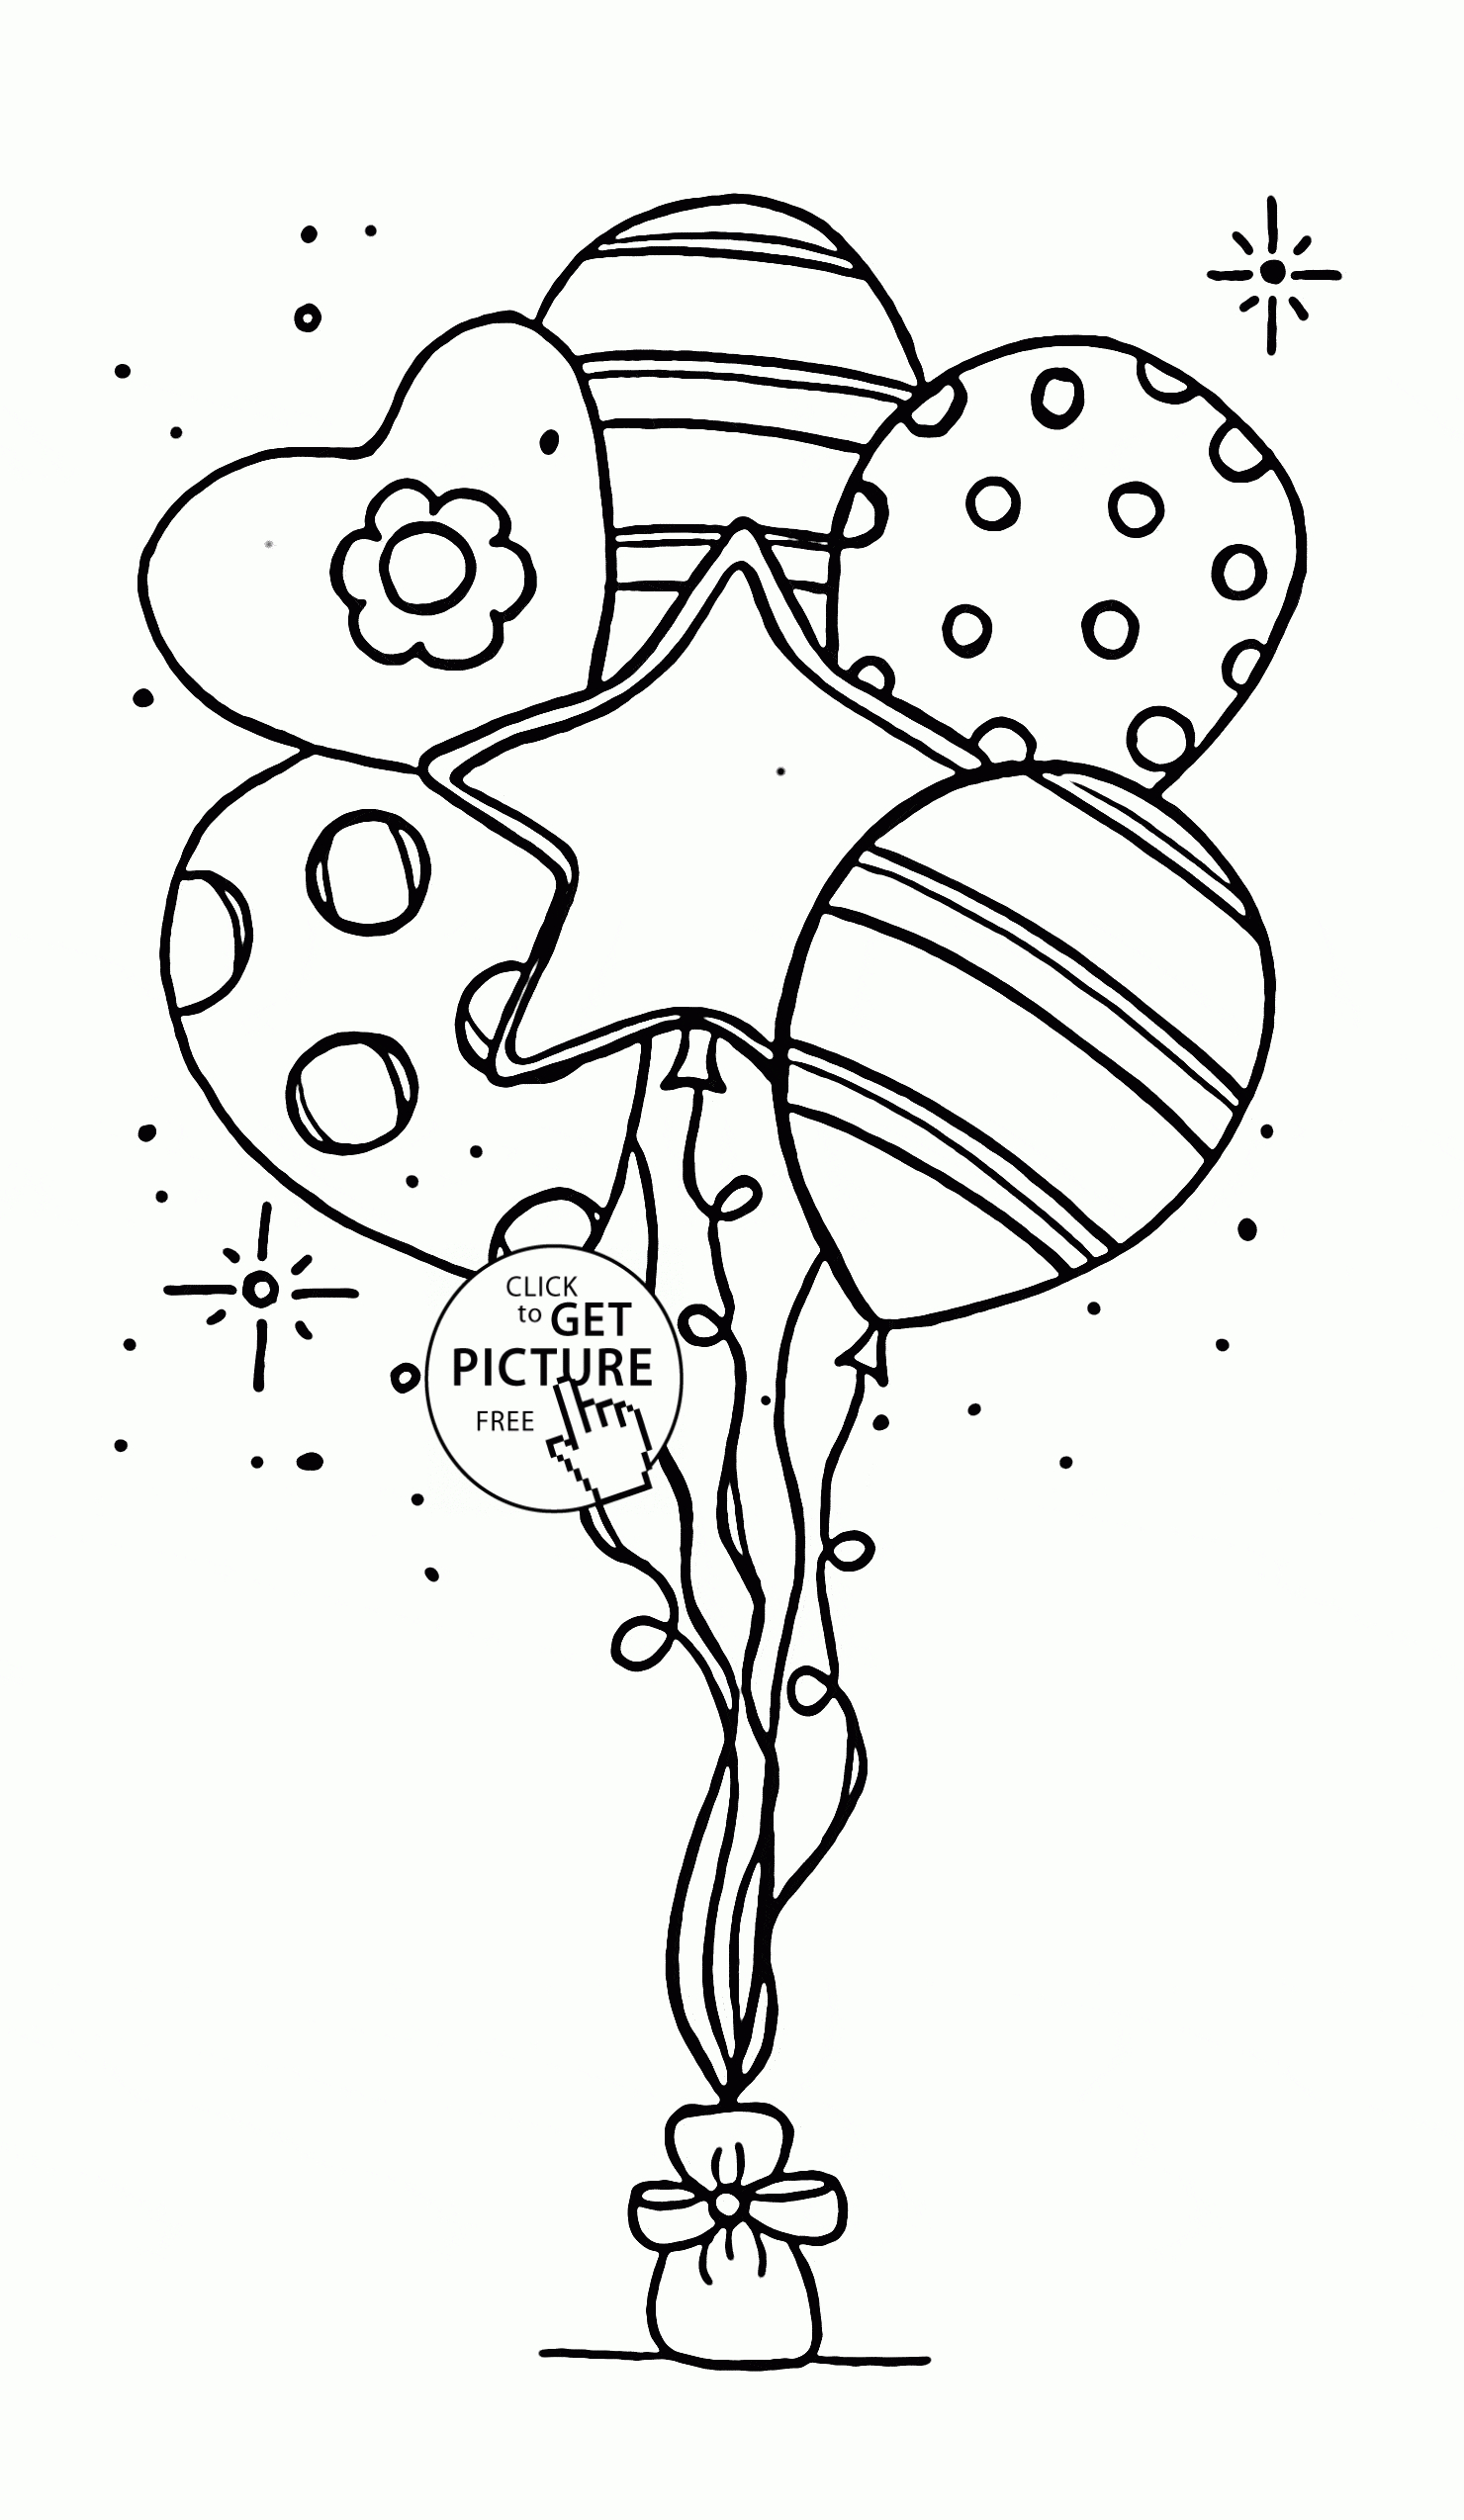 Beautiful Balloons For Birthday Coloring Page For Kids, Holiday - Free Printable Pictures Of Balloons